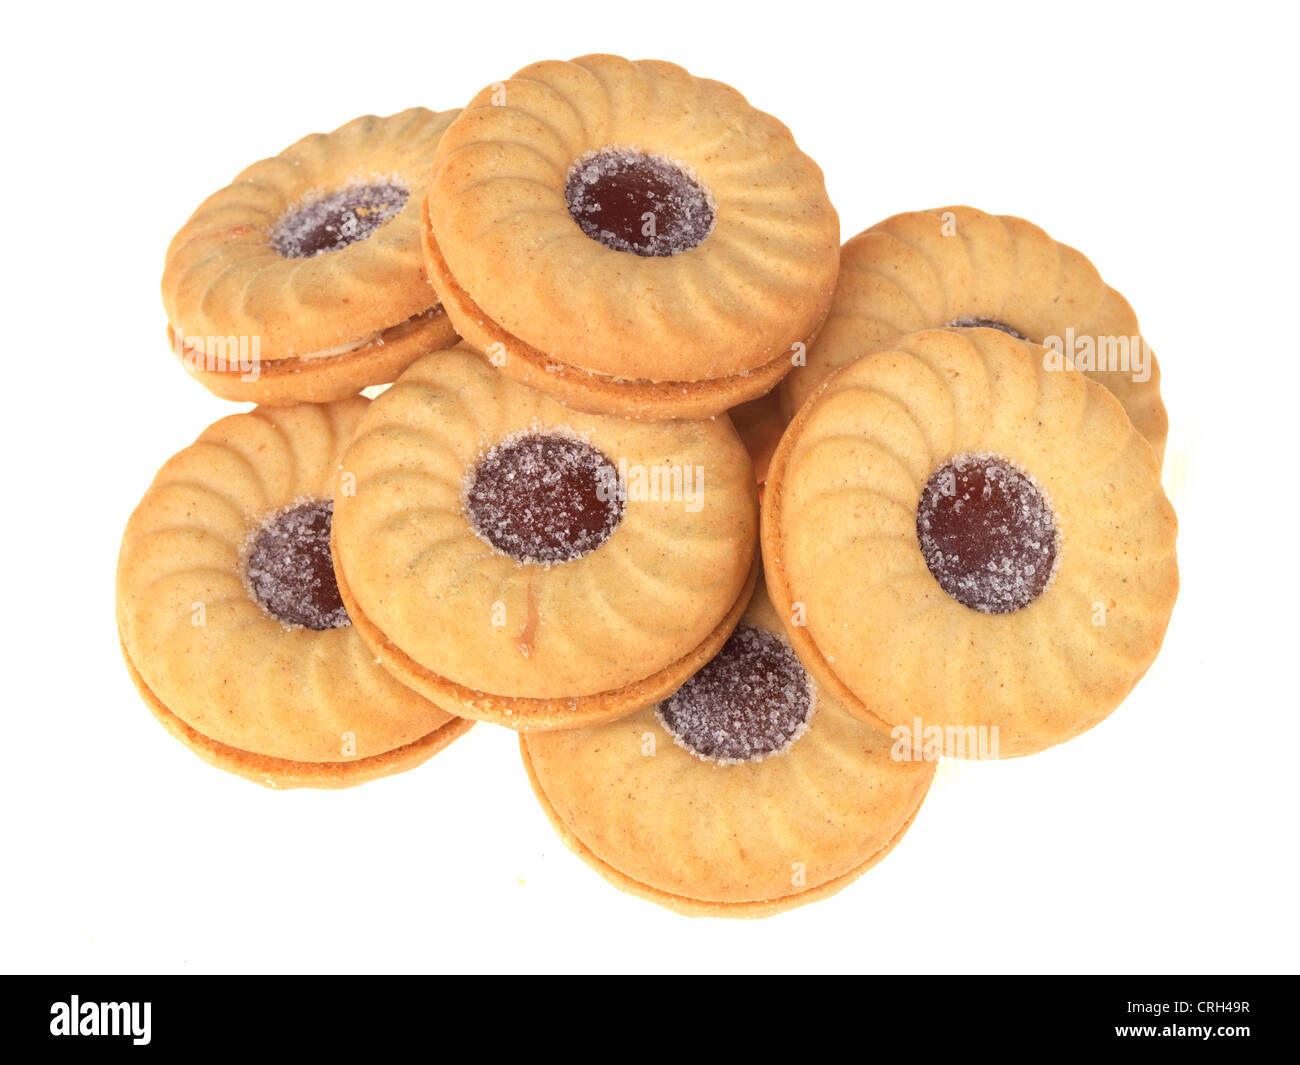 Jam and cream biscuits Cut Out Stock Images & Pictures - Alamy